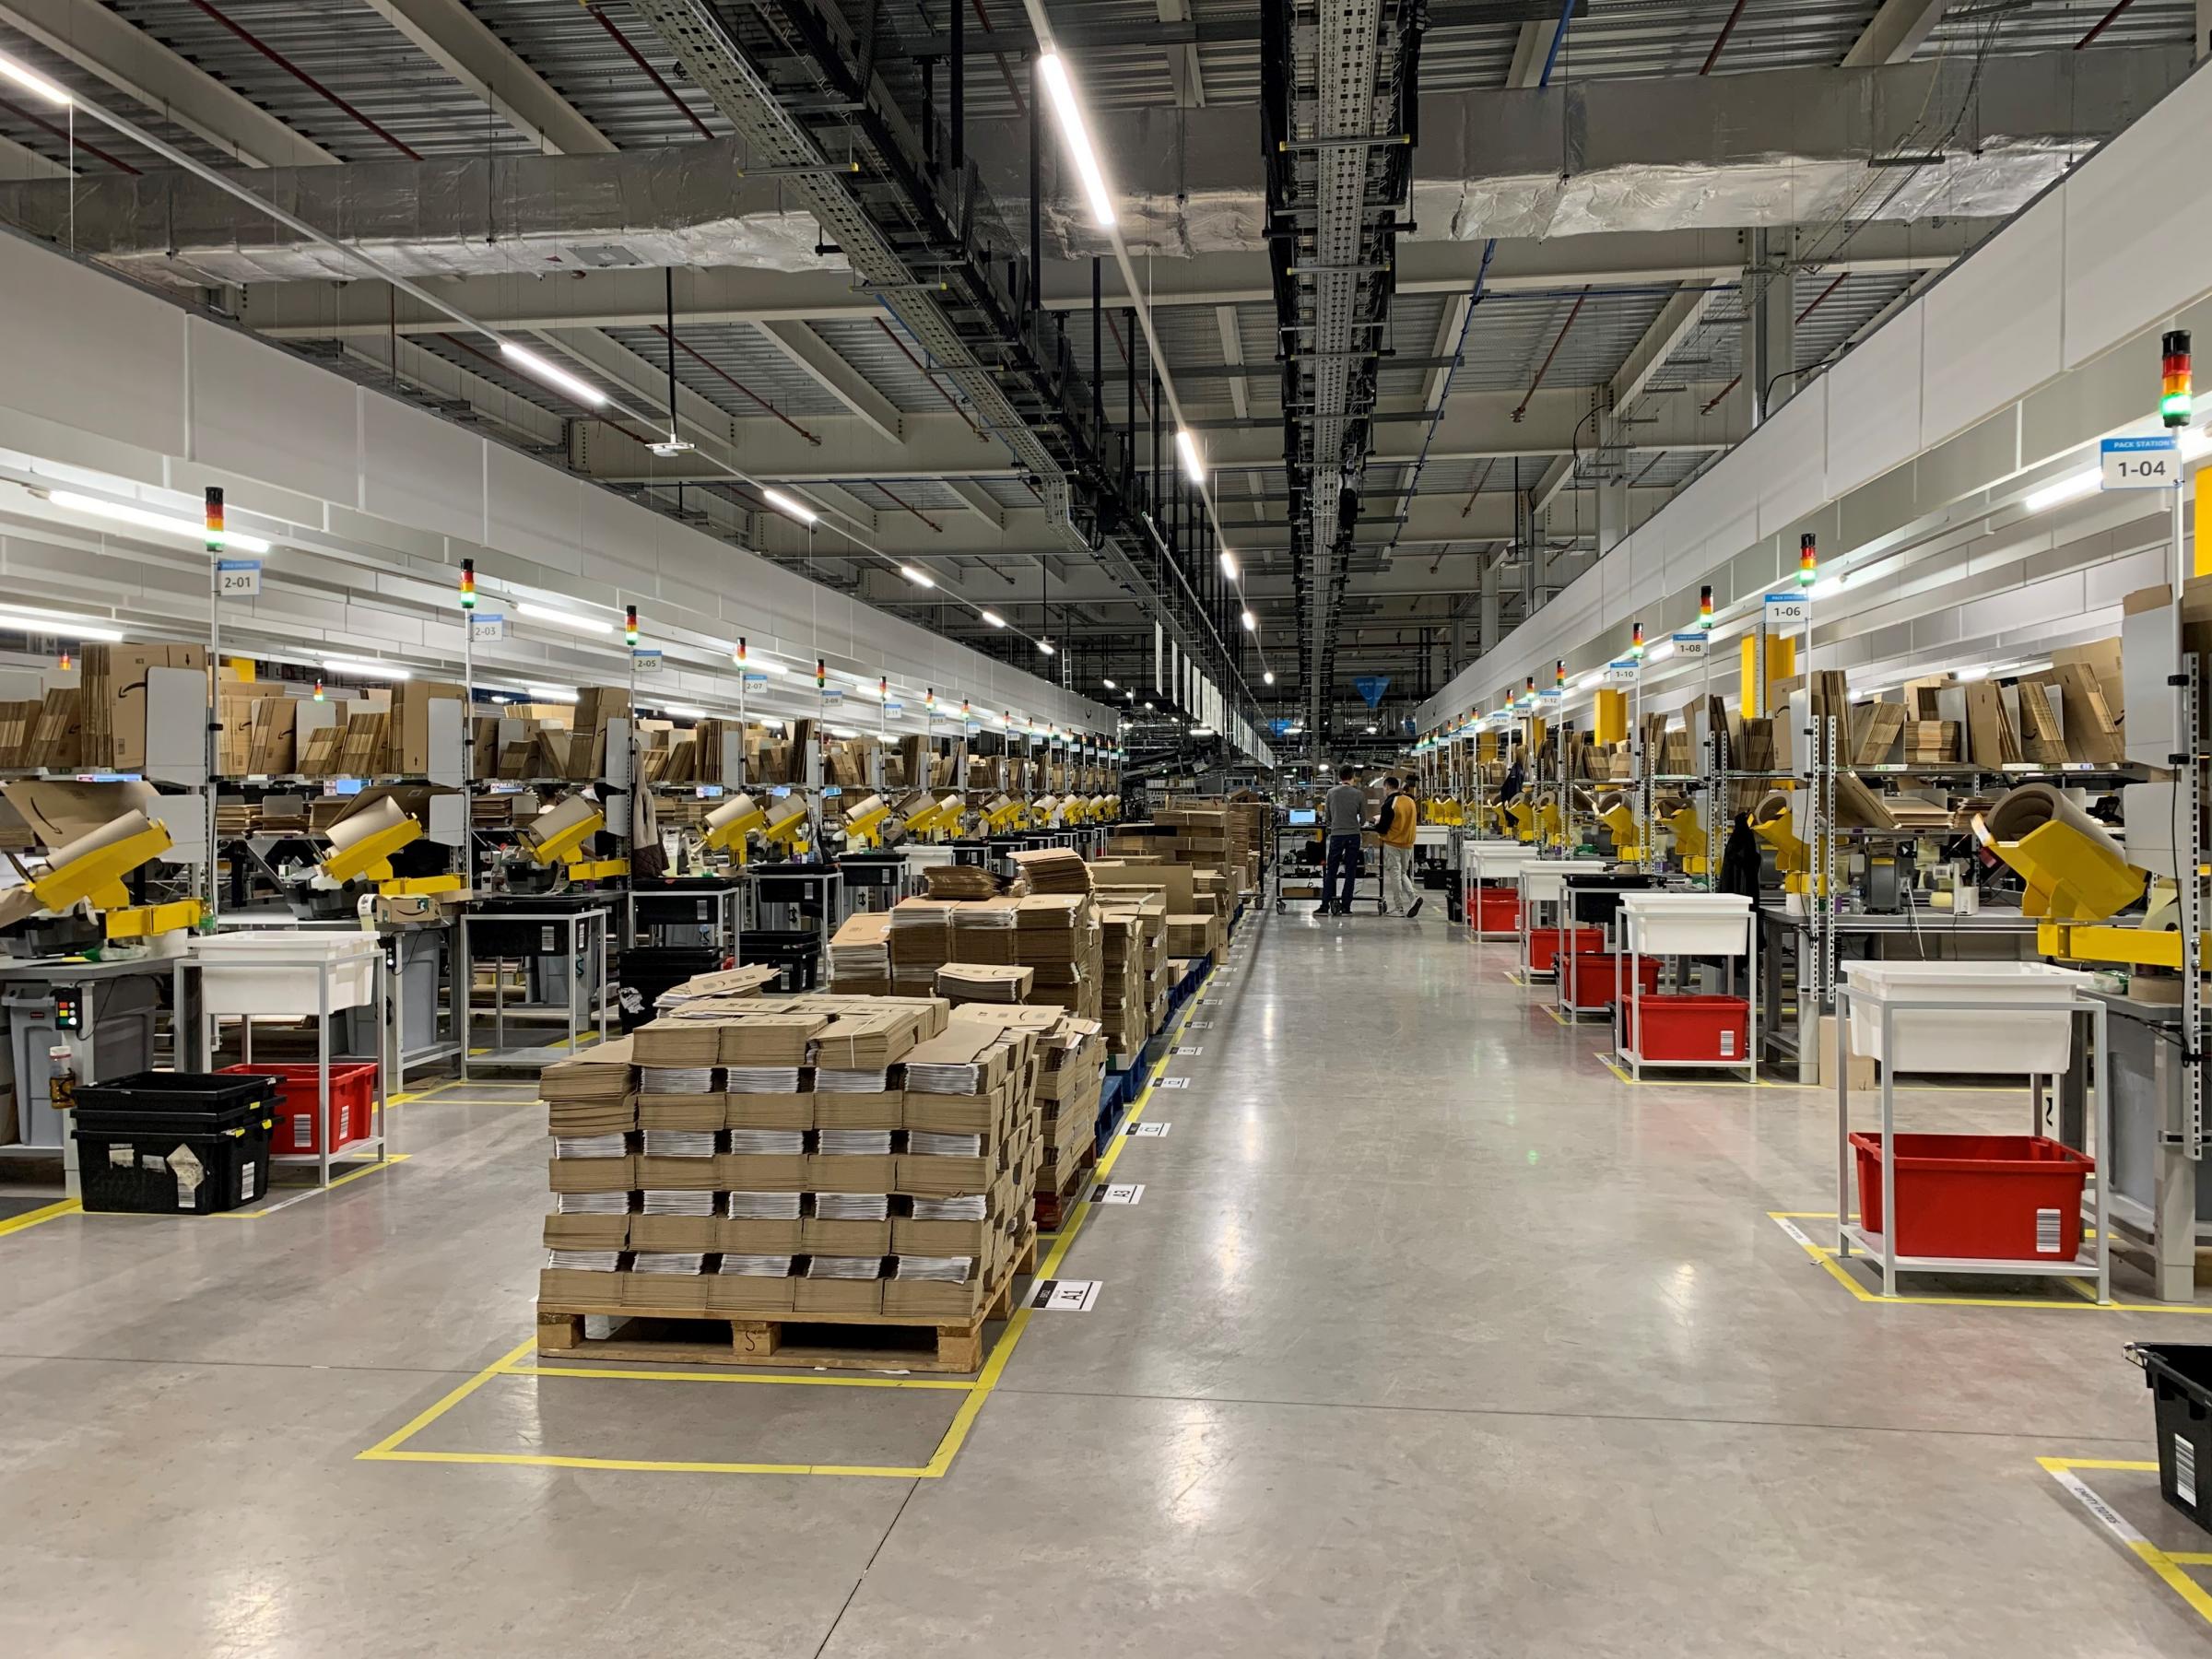 The newly-packaged Amazon orders sorted throughout the fulfilment centre warehouse are placed onto the conveyor belt to be sent to delivery centres